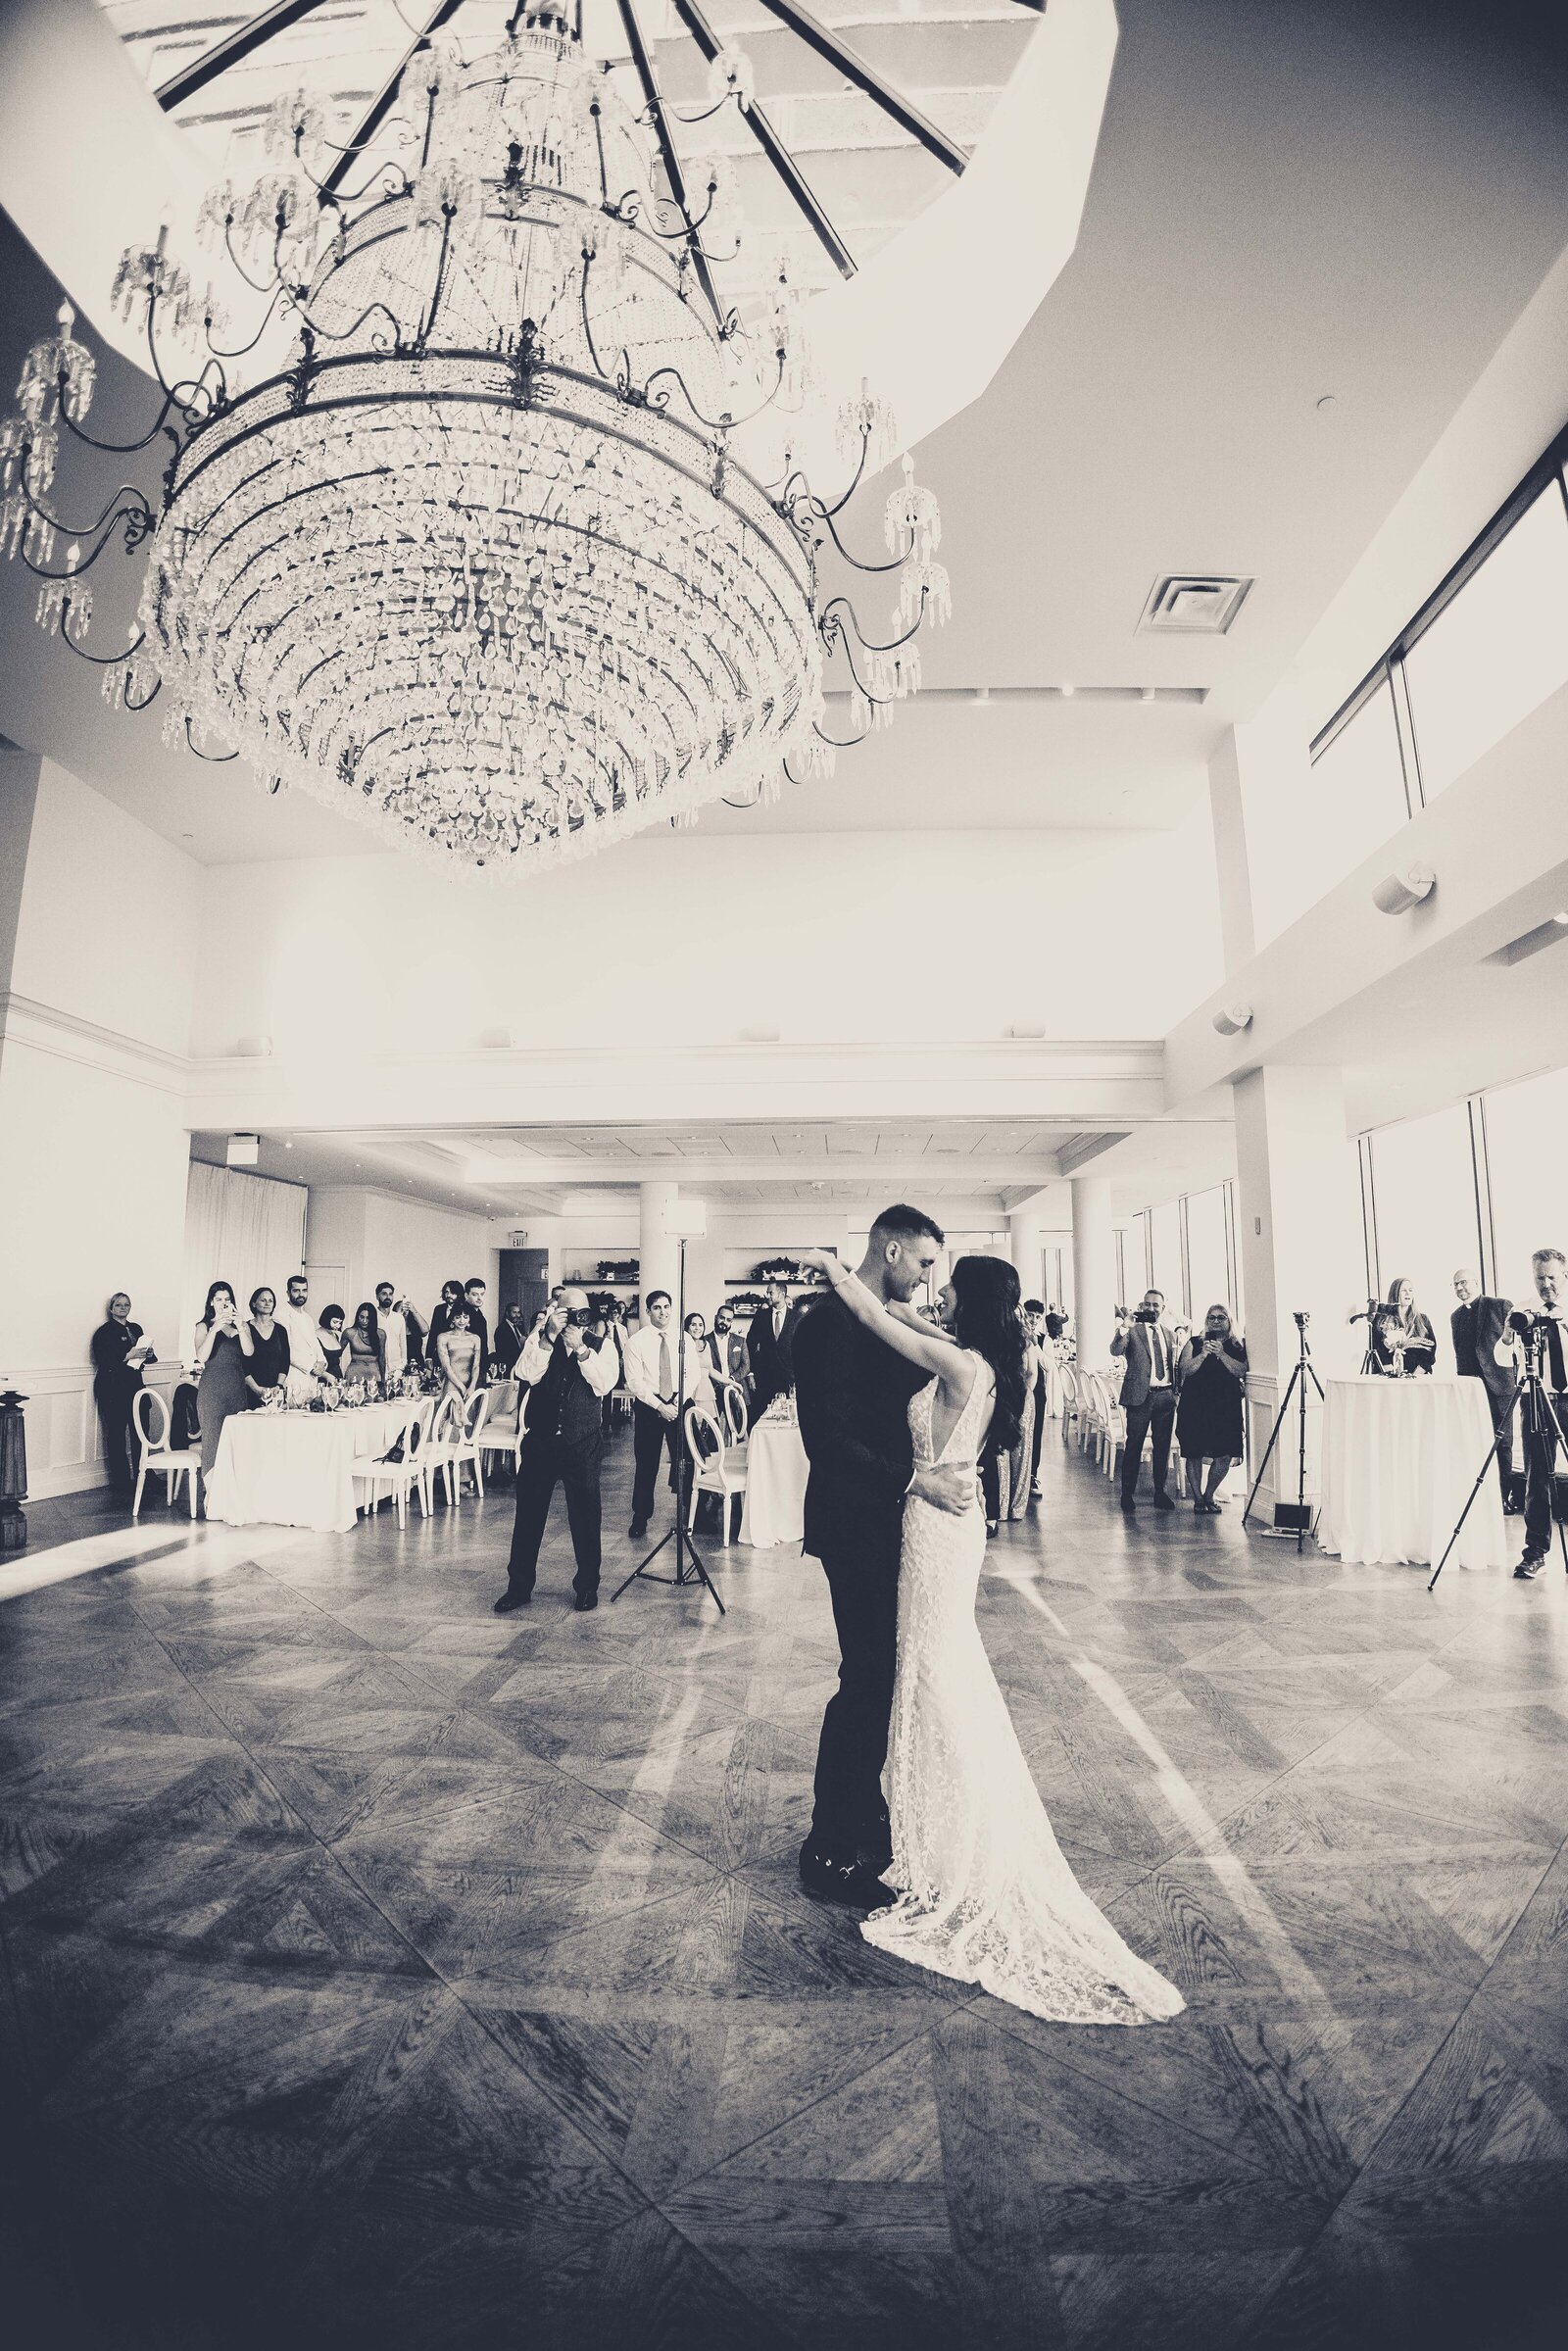 Step into the grandeur of a spectacular first dance captured from a wide-angle perspective at The View. This breathtaking photograph showcases the bride and groom in the midst of their dance, enveloped by the expansive elegance of the venue. The wide-angle shot emphasizes the scale and beauty of the setting, highlighting the couple's intimate moment amidst the stunning decor and spacious surroundings. Ideal for couples looking for inspiration on capturing the majesty and romance of their first dance in a grand venue.